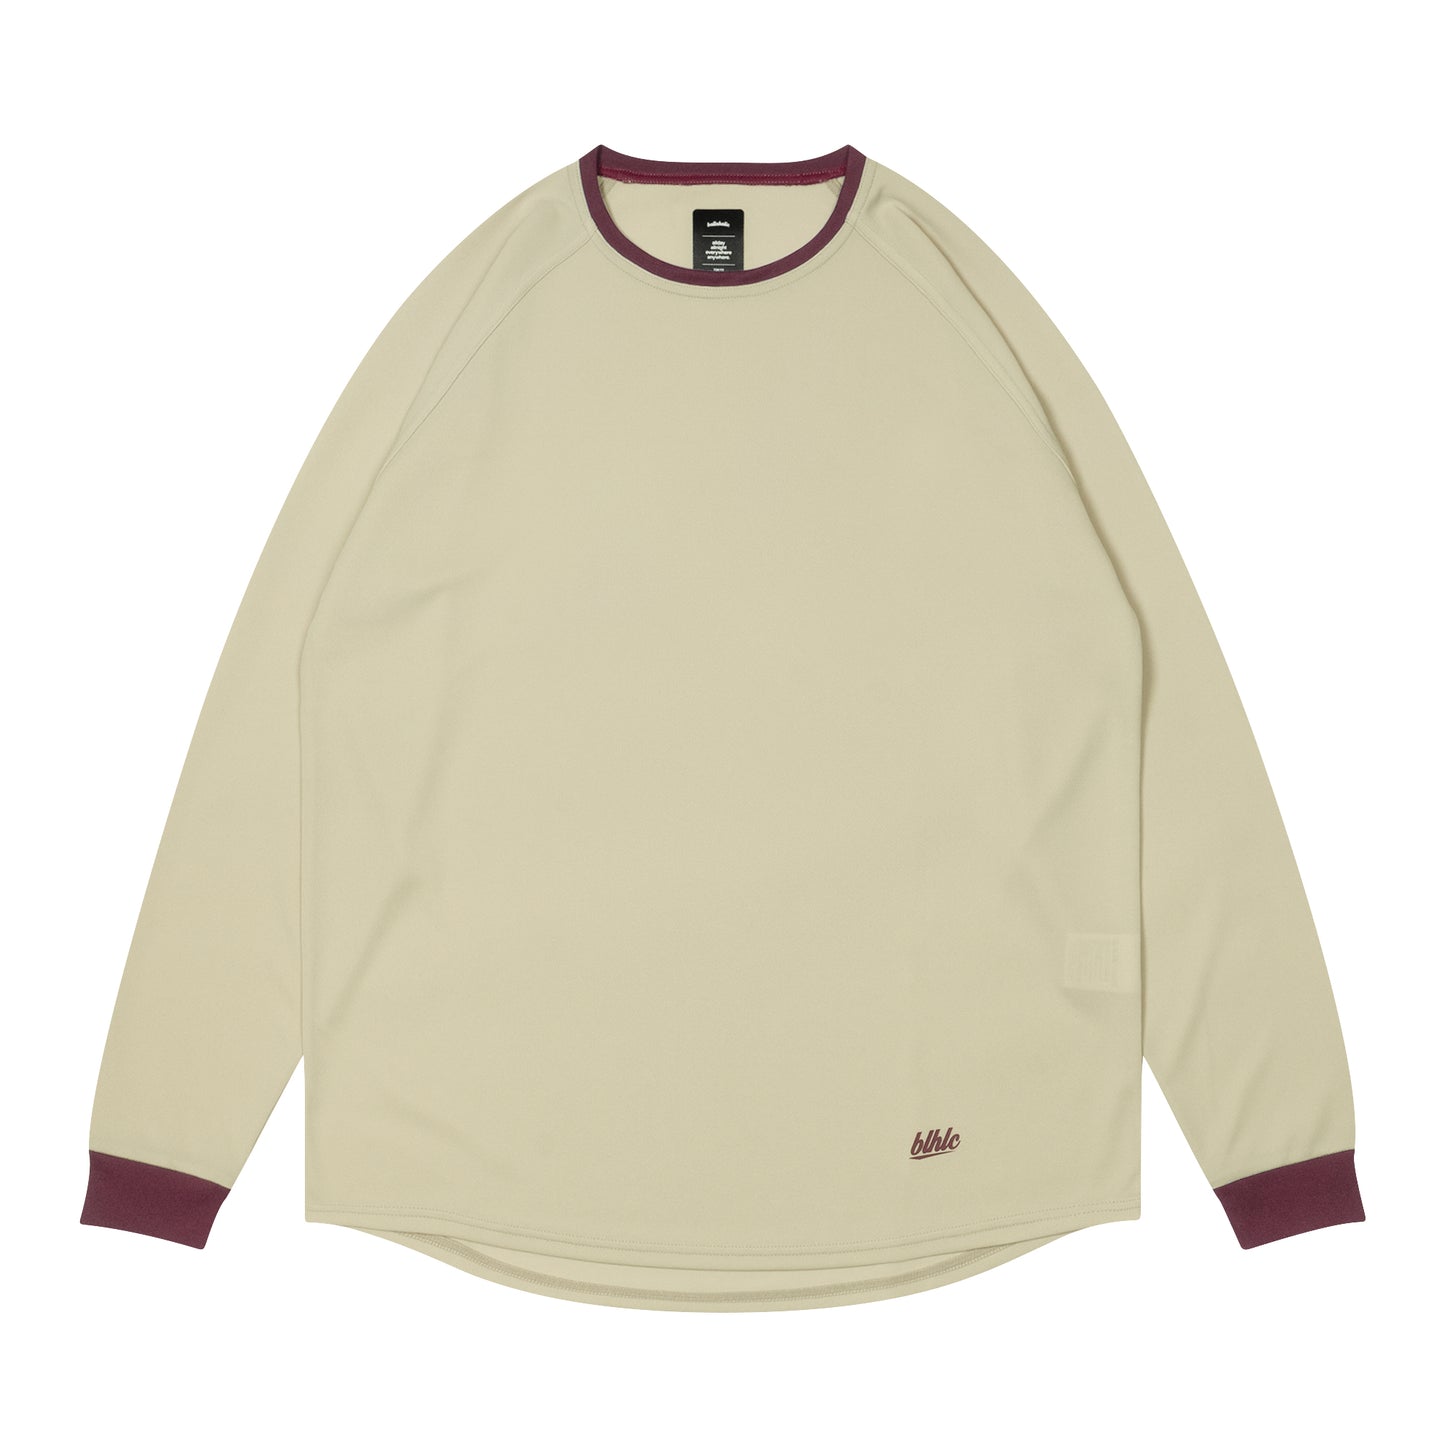 blhlc Cool Long Tee (oatmeal)